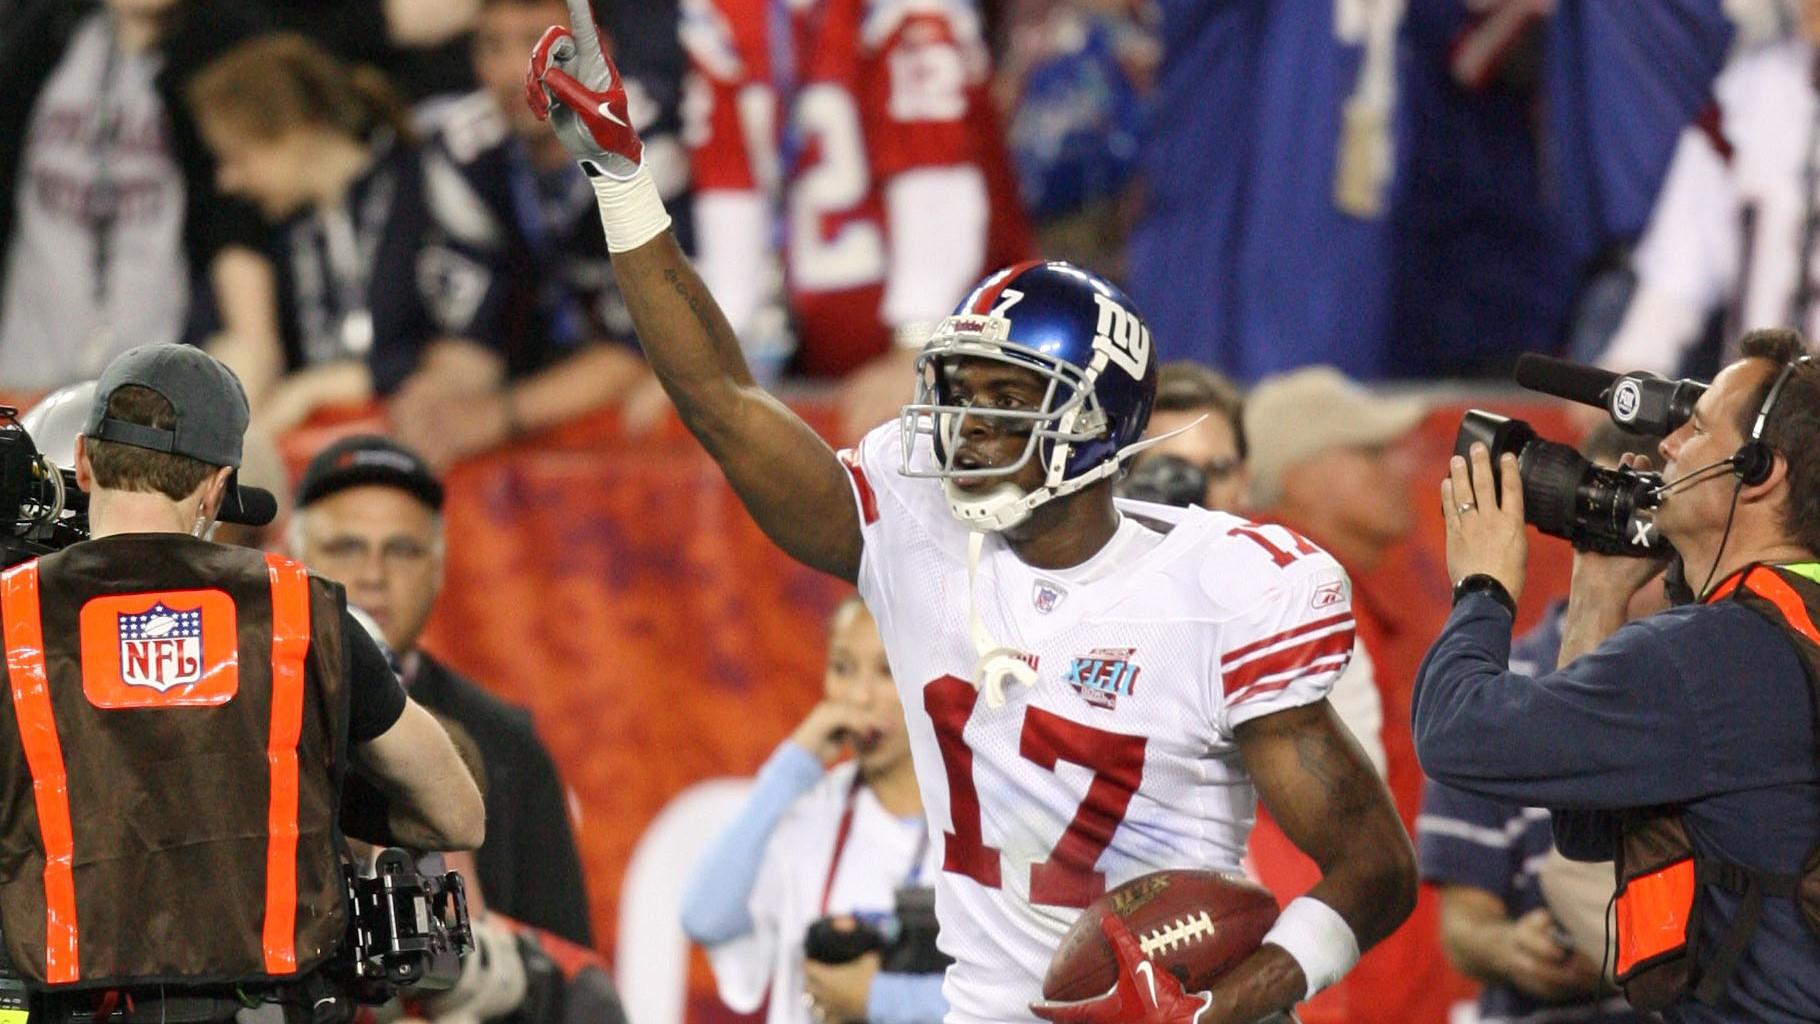 Feb 3, 2008; Glendale, AZ, USA; New York Giants wide receiver Plaxico Burress (17) celebrates catching the game-winning touchdown in the fourth quarter of Super Bowl XLII at the University of Phoenix Stadium. New York Giants defeated the New England Patriots with a final of 17-14. Mandatory Credit: John David Mercer-USA TODAY Sports / John David Mercer-USA TODAY Sports